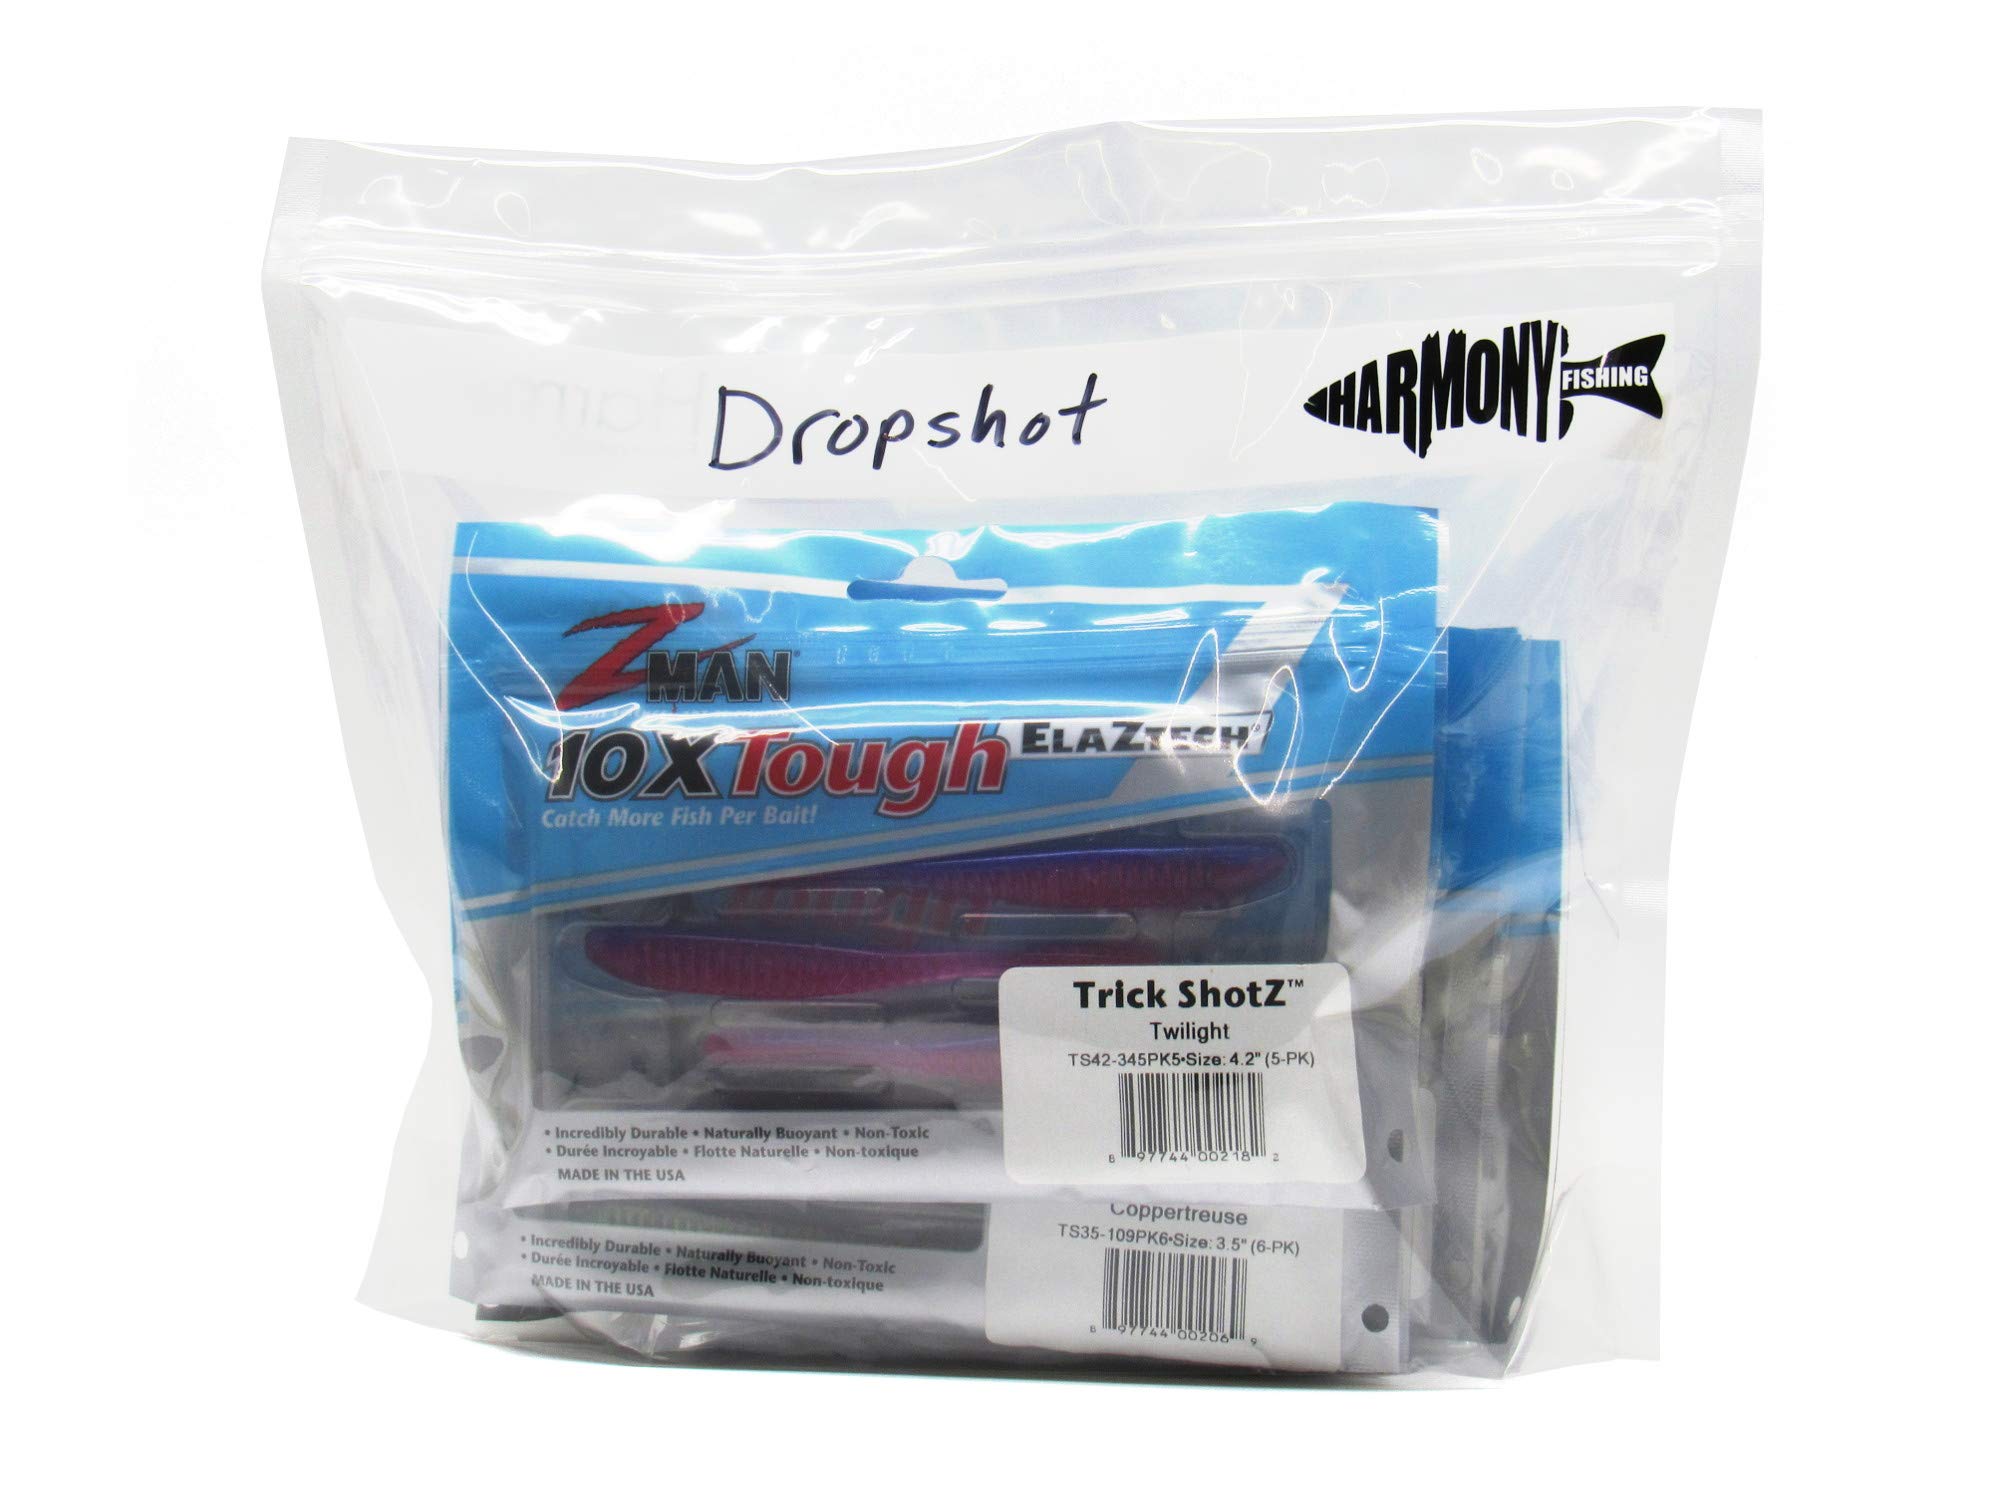 Harmony Fishing Bait Bags (10 Pack) - Durable Clear Storage Bag